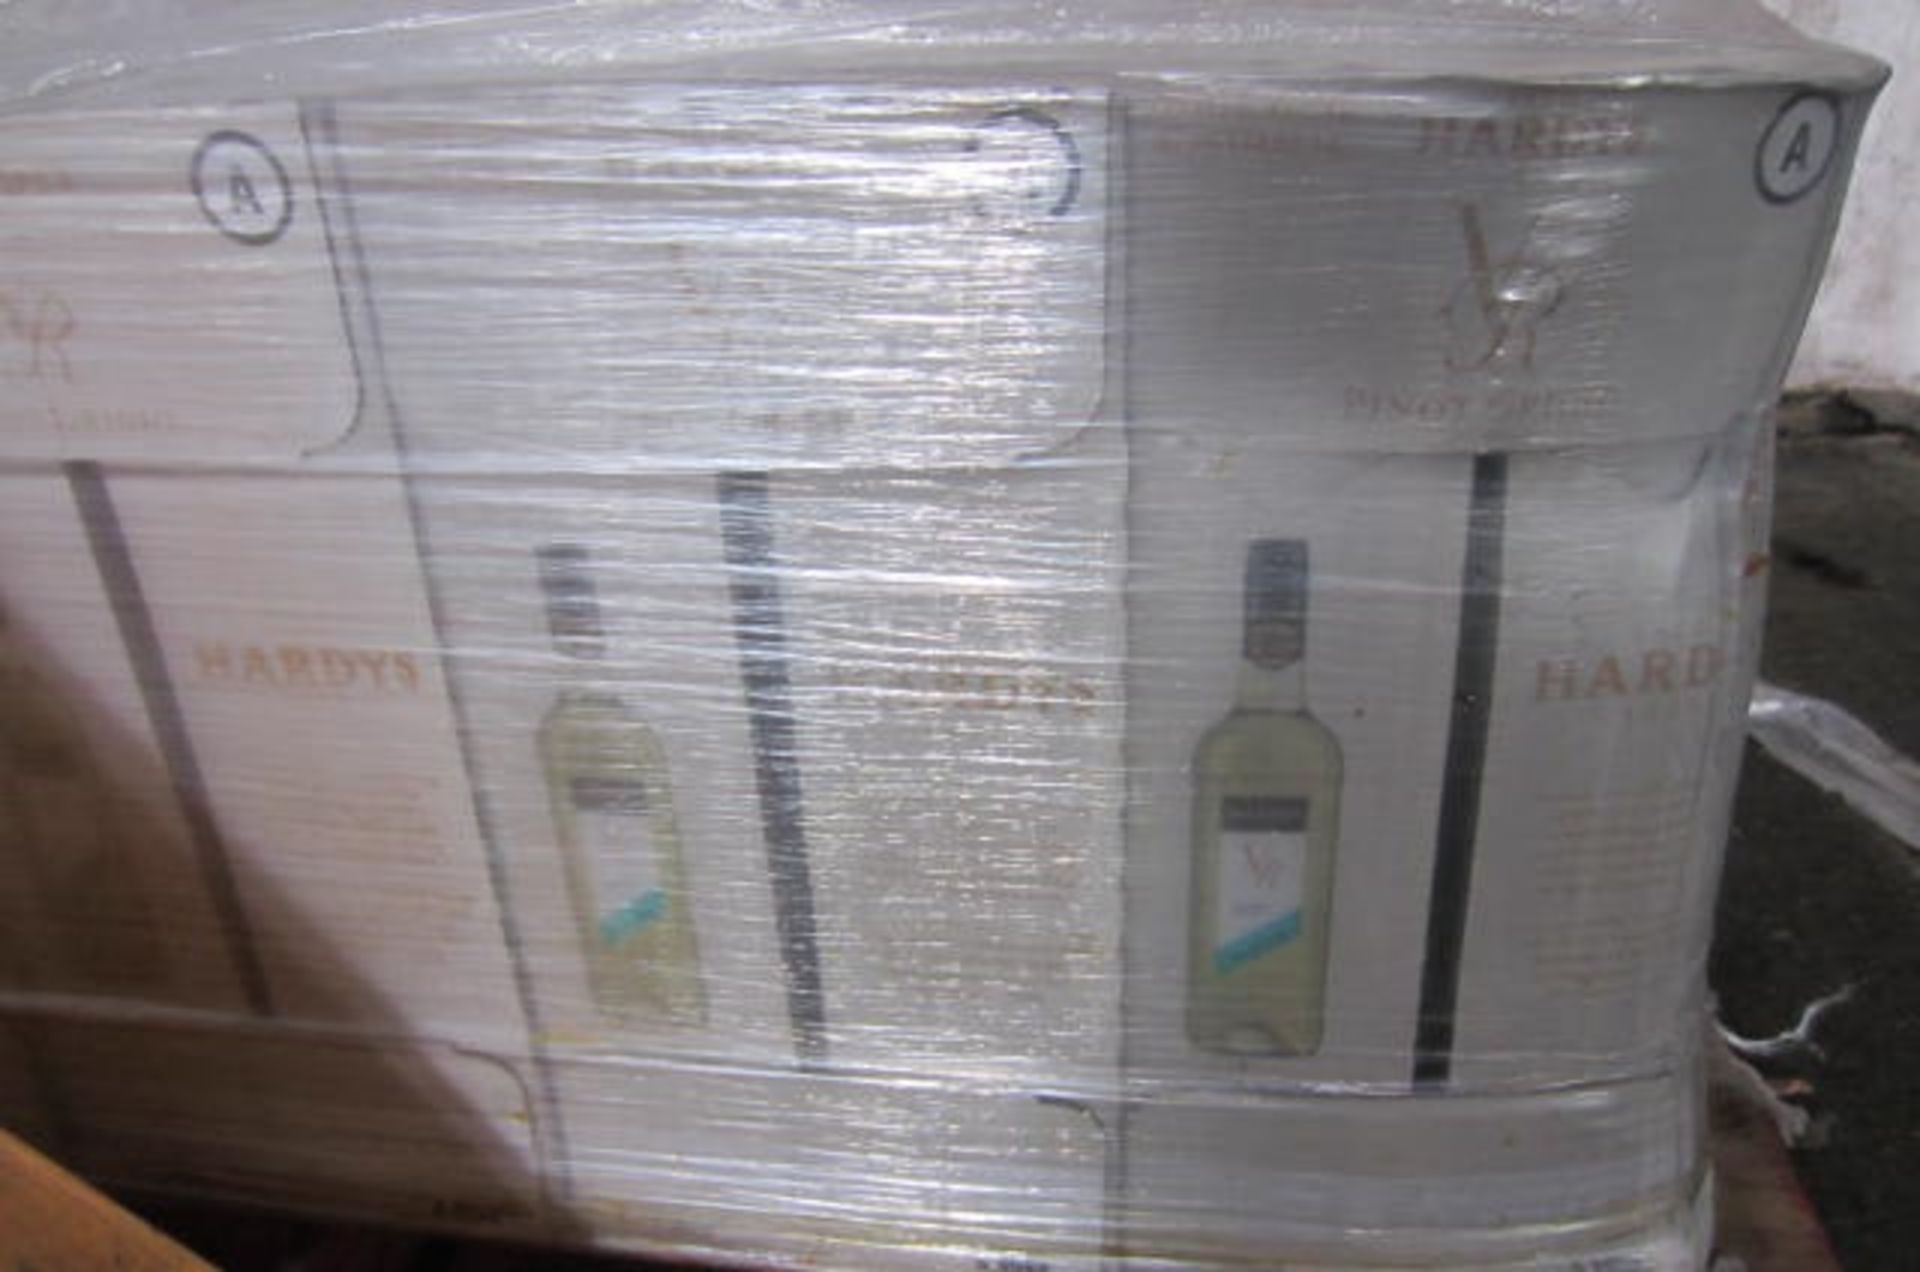 Part Pallet Containing 30 Cases of 6 Bottles of Hardy's VR Pinot Grigio White Wine. - Image 2 of 2